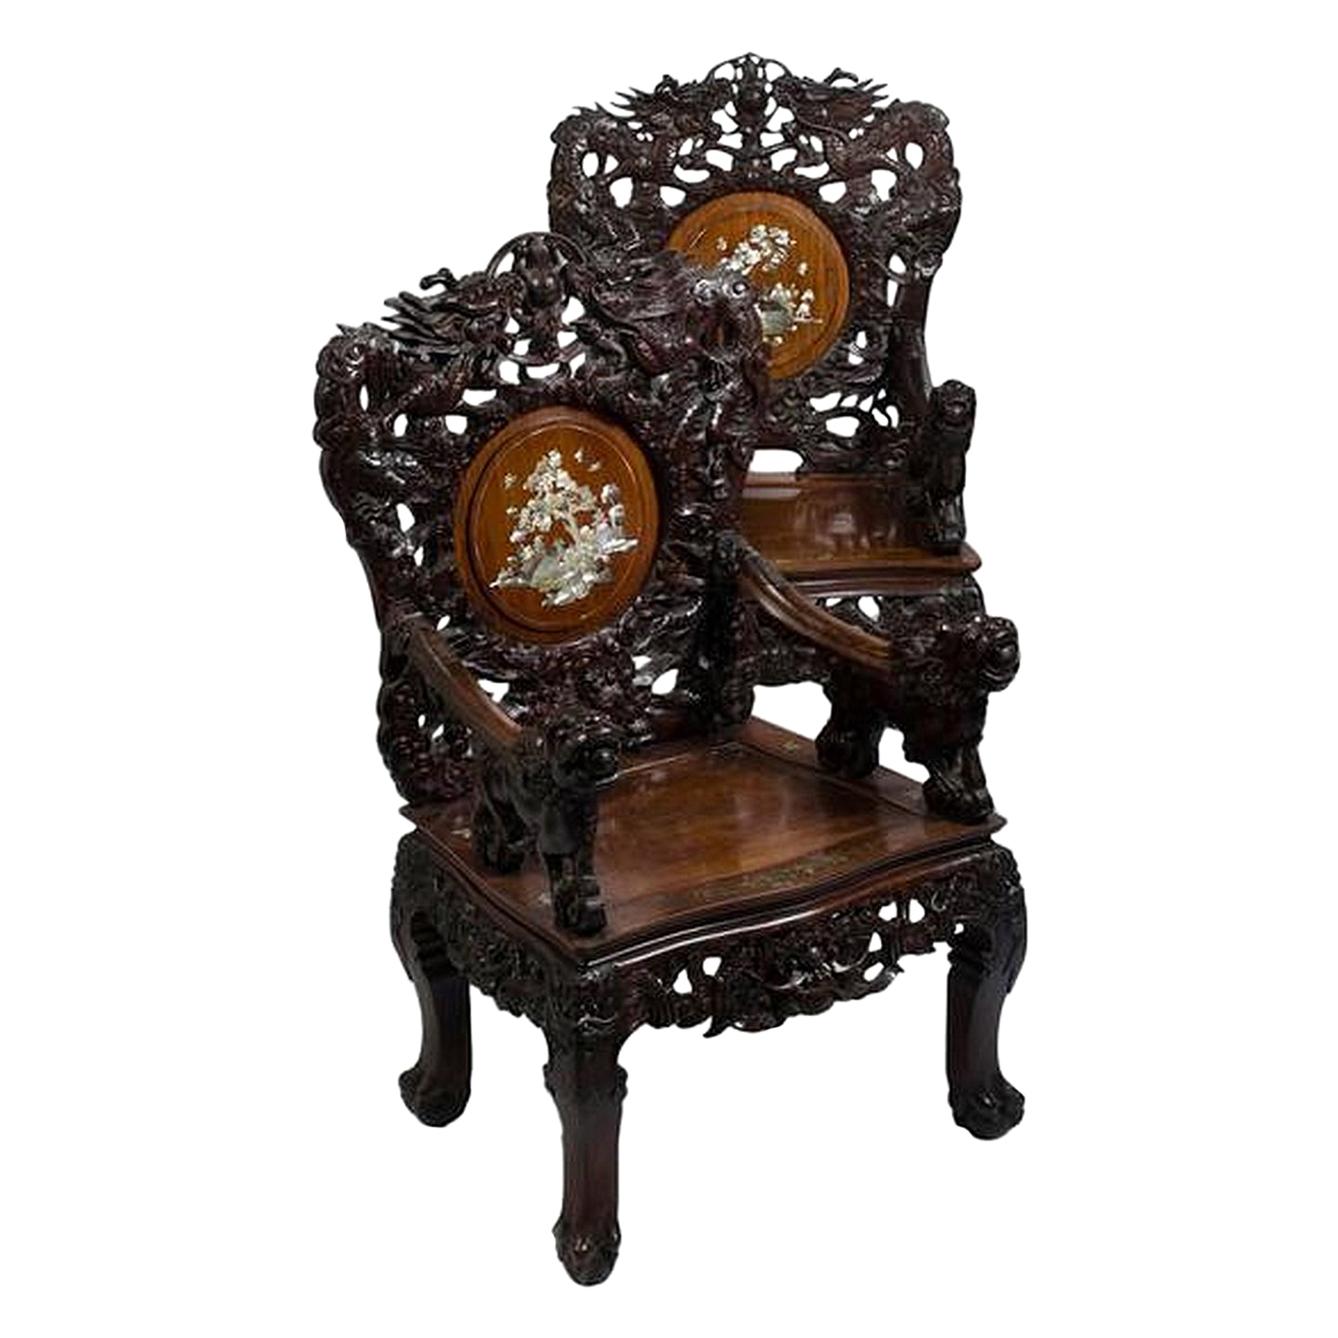 Pair of Indochinese Armchairs, circa 1880-1900